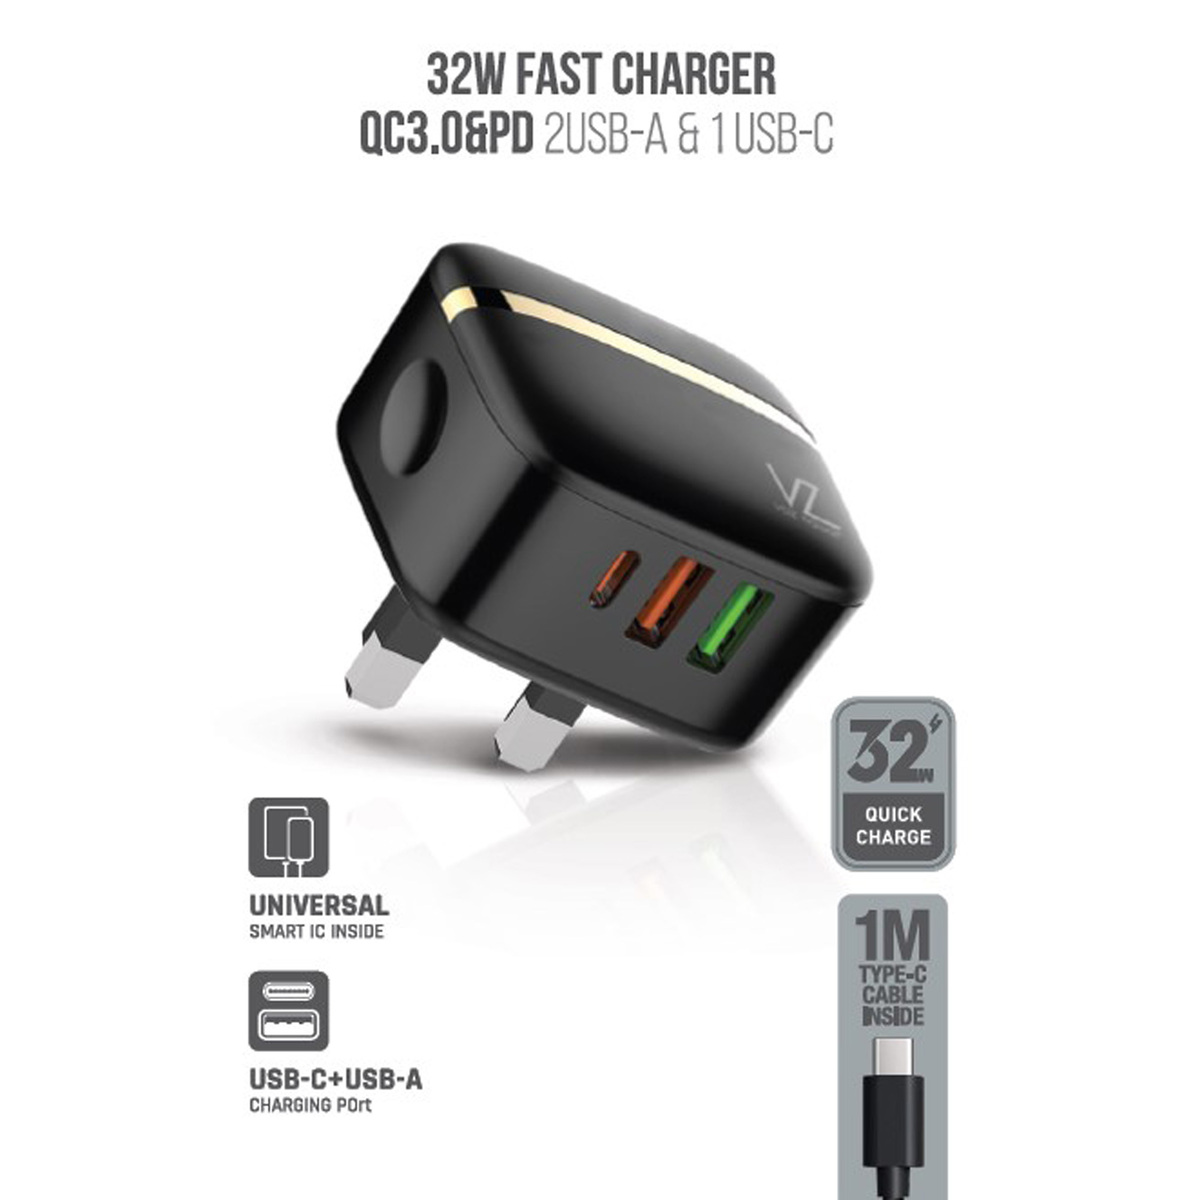 Voz 32W Three port Wall Charger With PD+QC 3.0 Port Type C Cable, Black, VZWPD02T